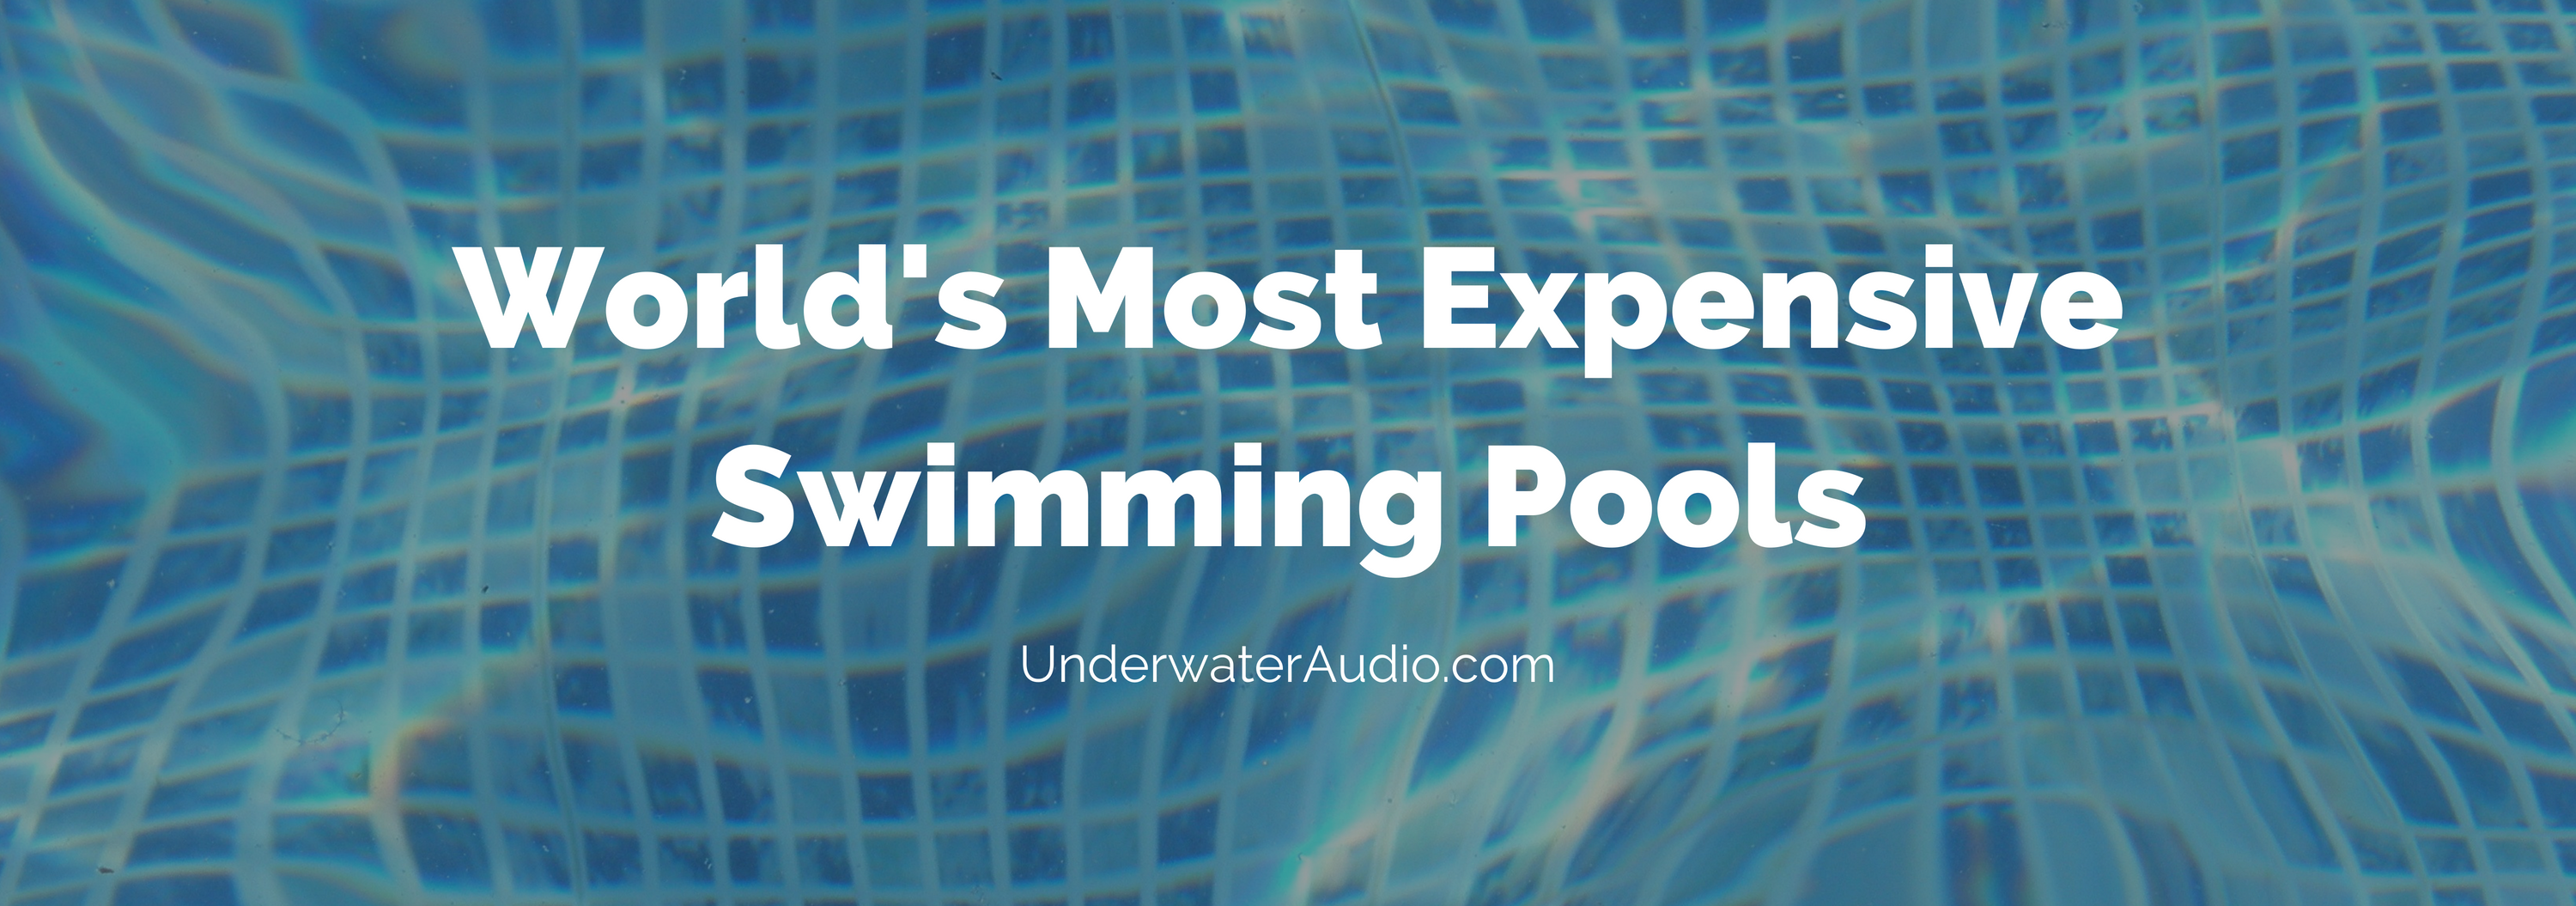 World's Most Expensive Swimming Pools